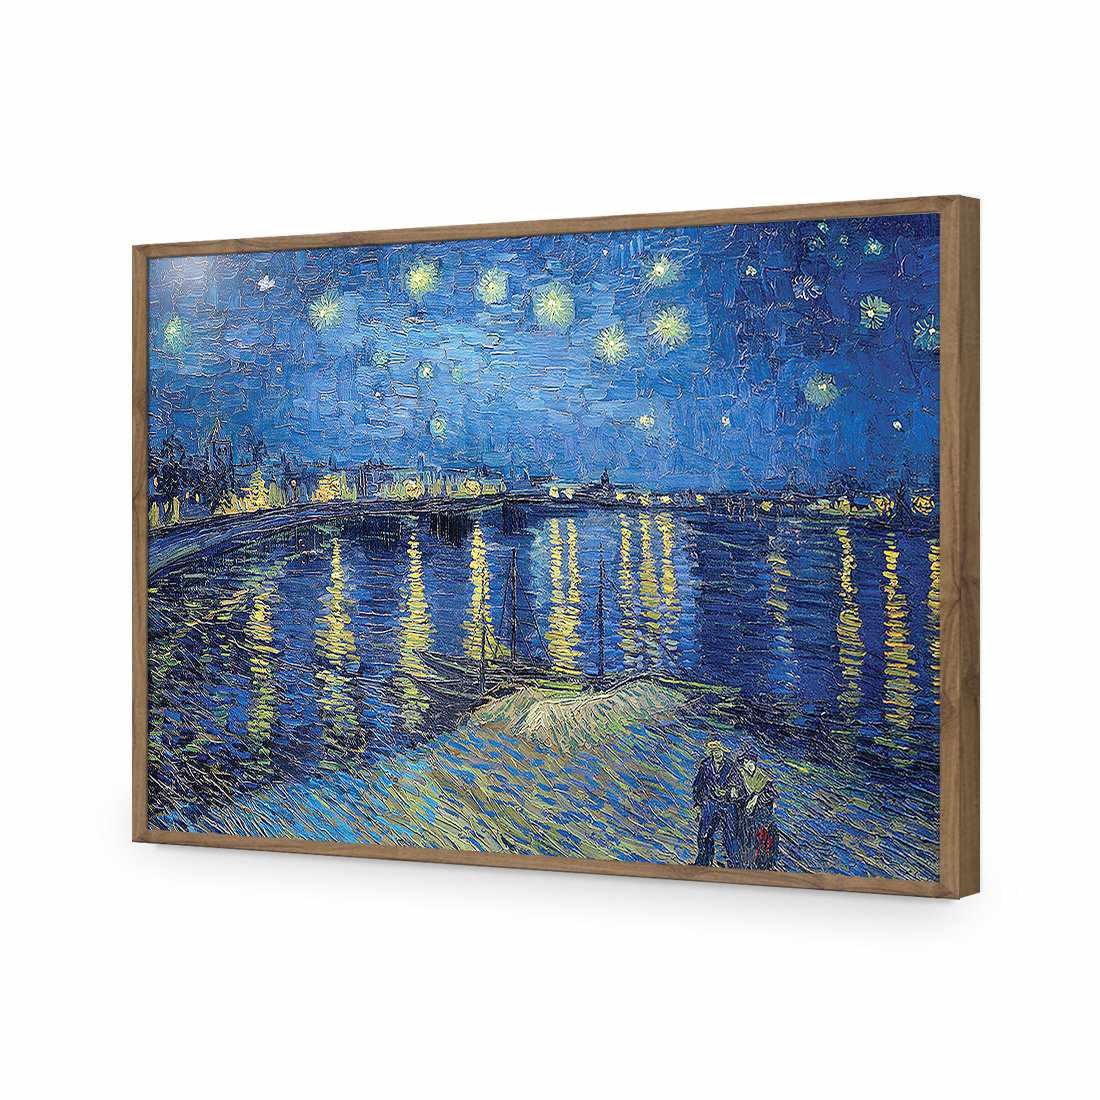 Starry Night Over the Rhone - Van Gogh-Acrylic-Wall Art Design-Without Border-Acrylic - Natural Frame-45x30cm-Wall Art Designs